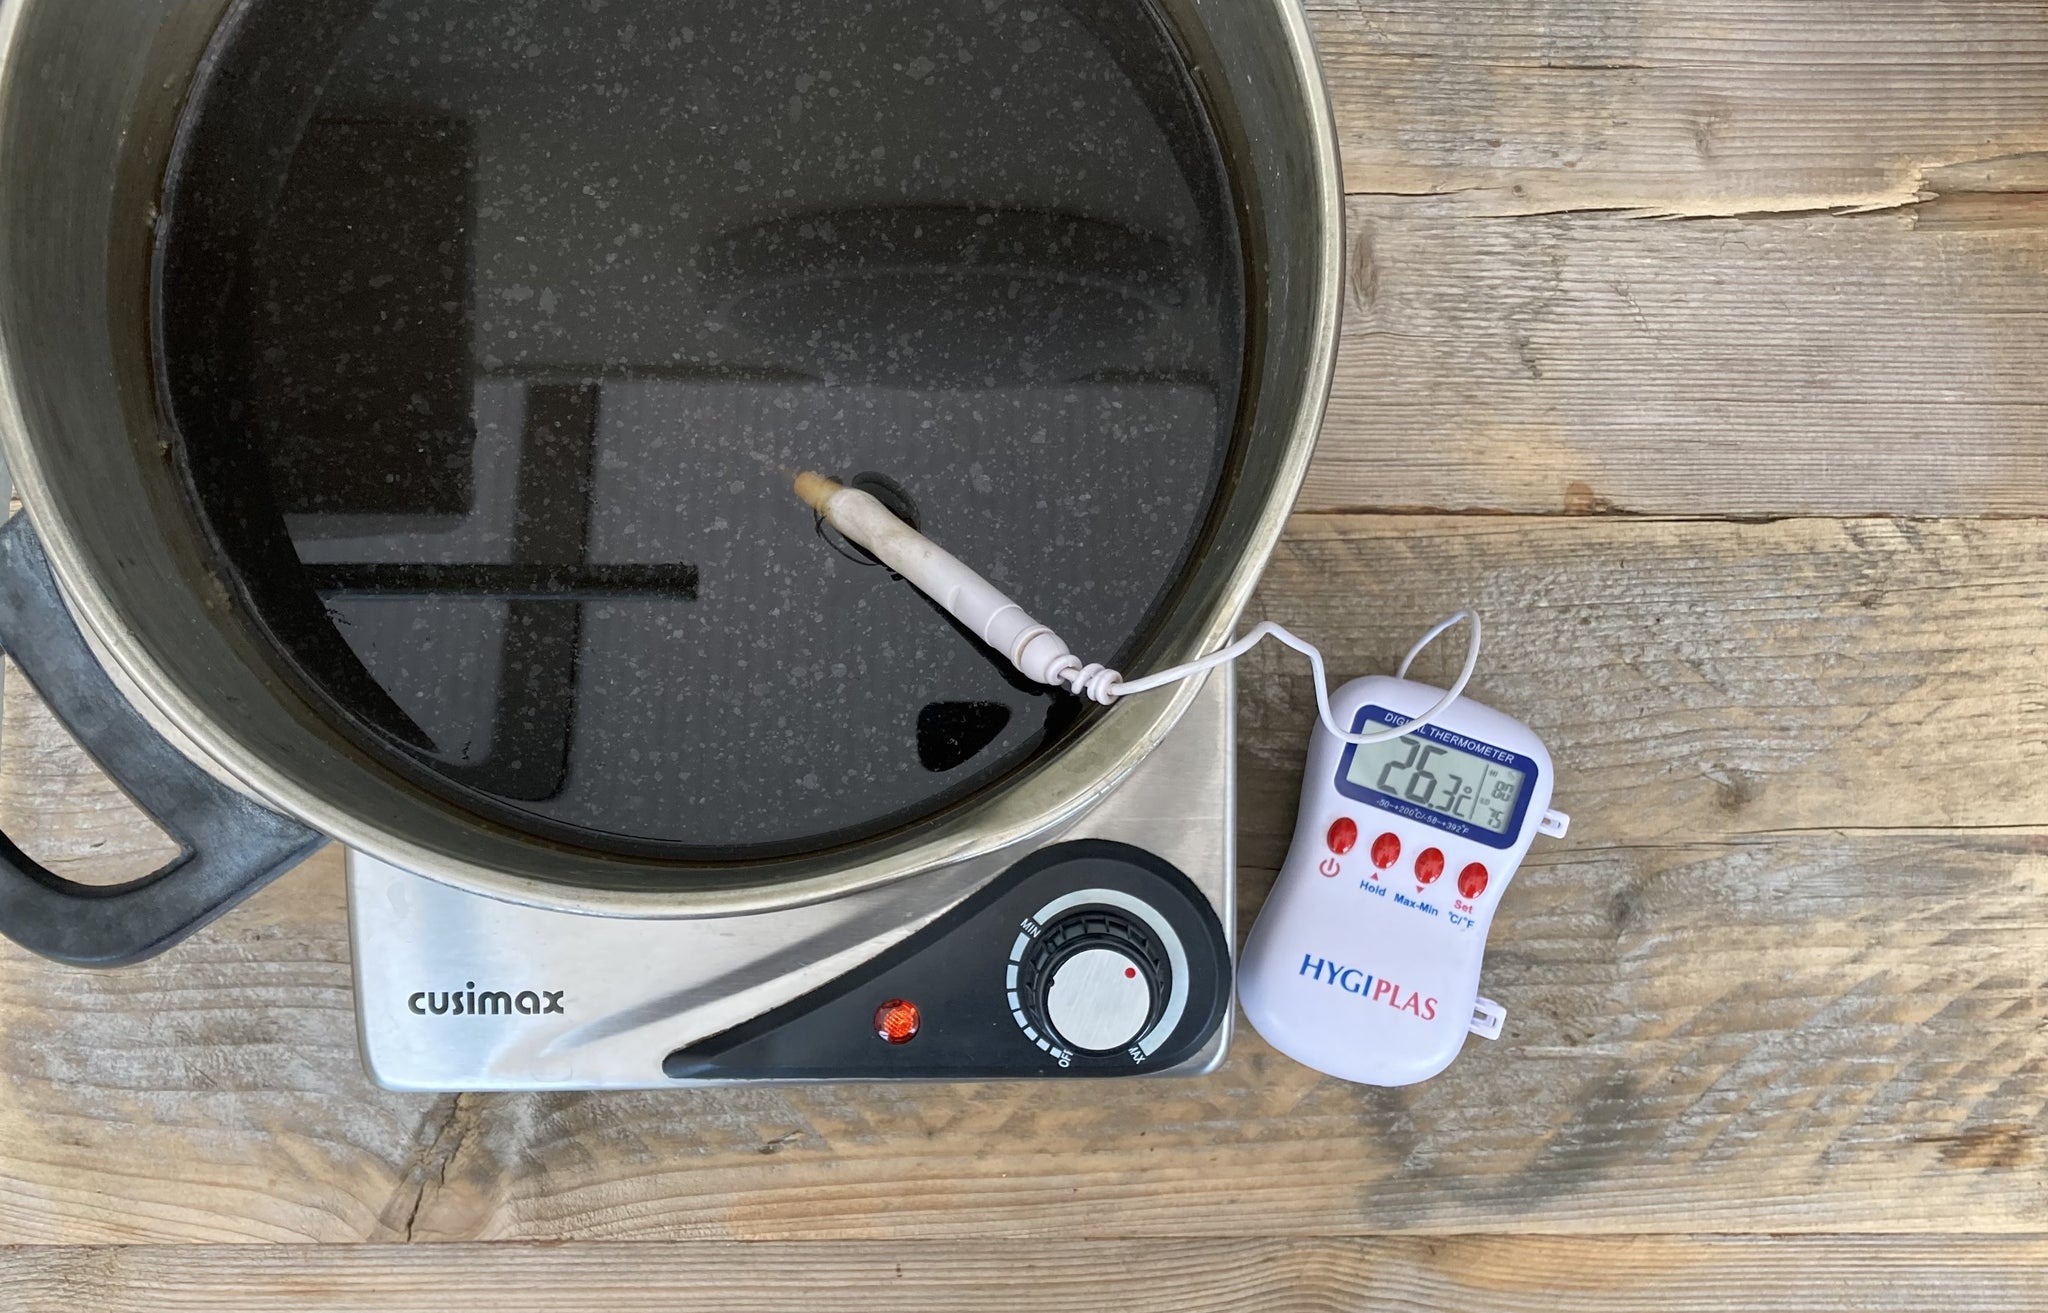 Heating the crushed acorns in the saucepan on a hob, checking the temperature with an electric thermometer